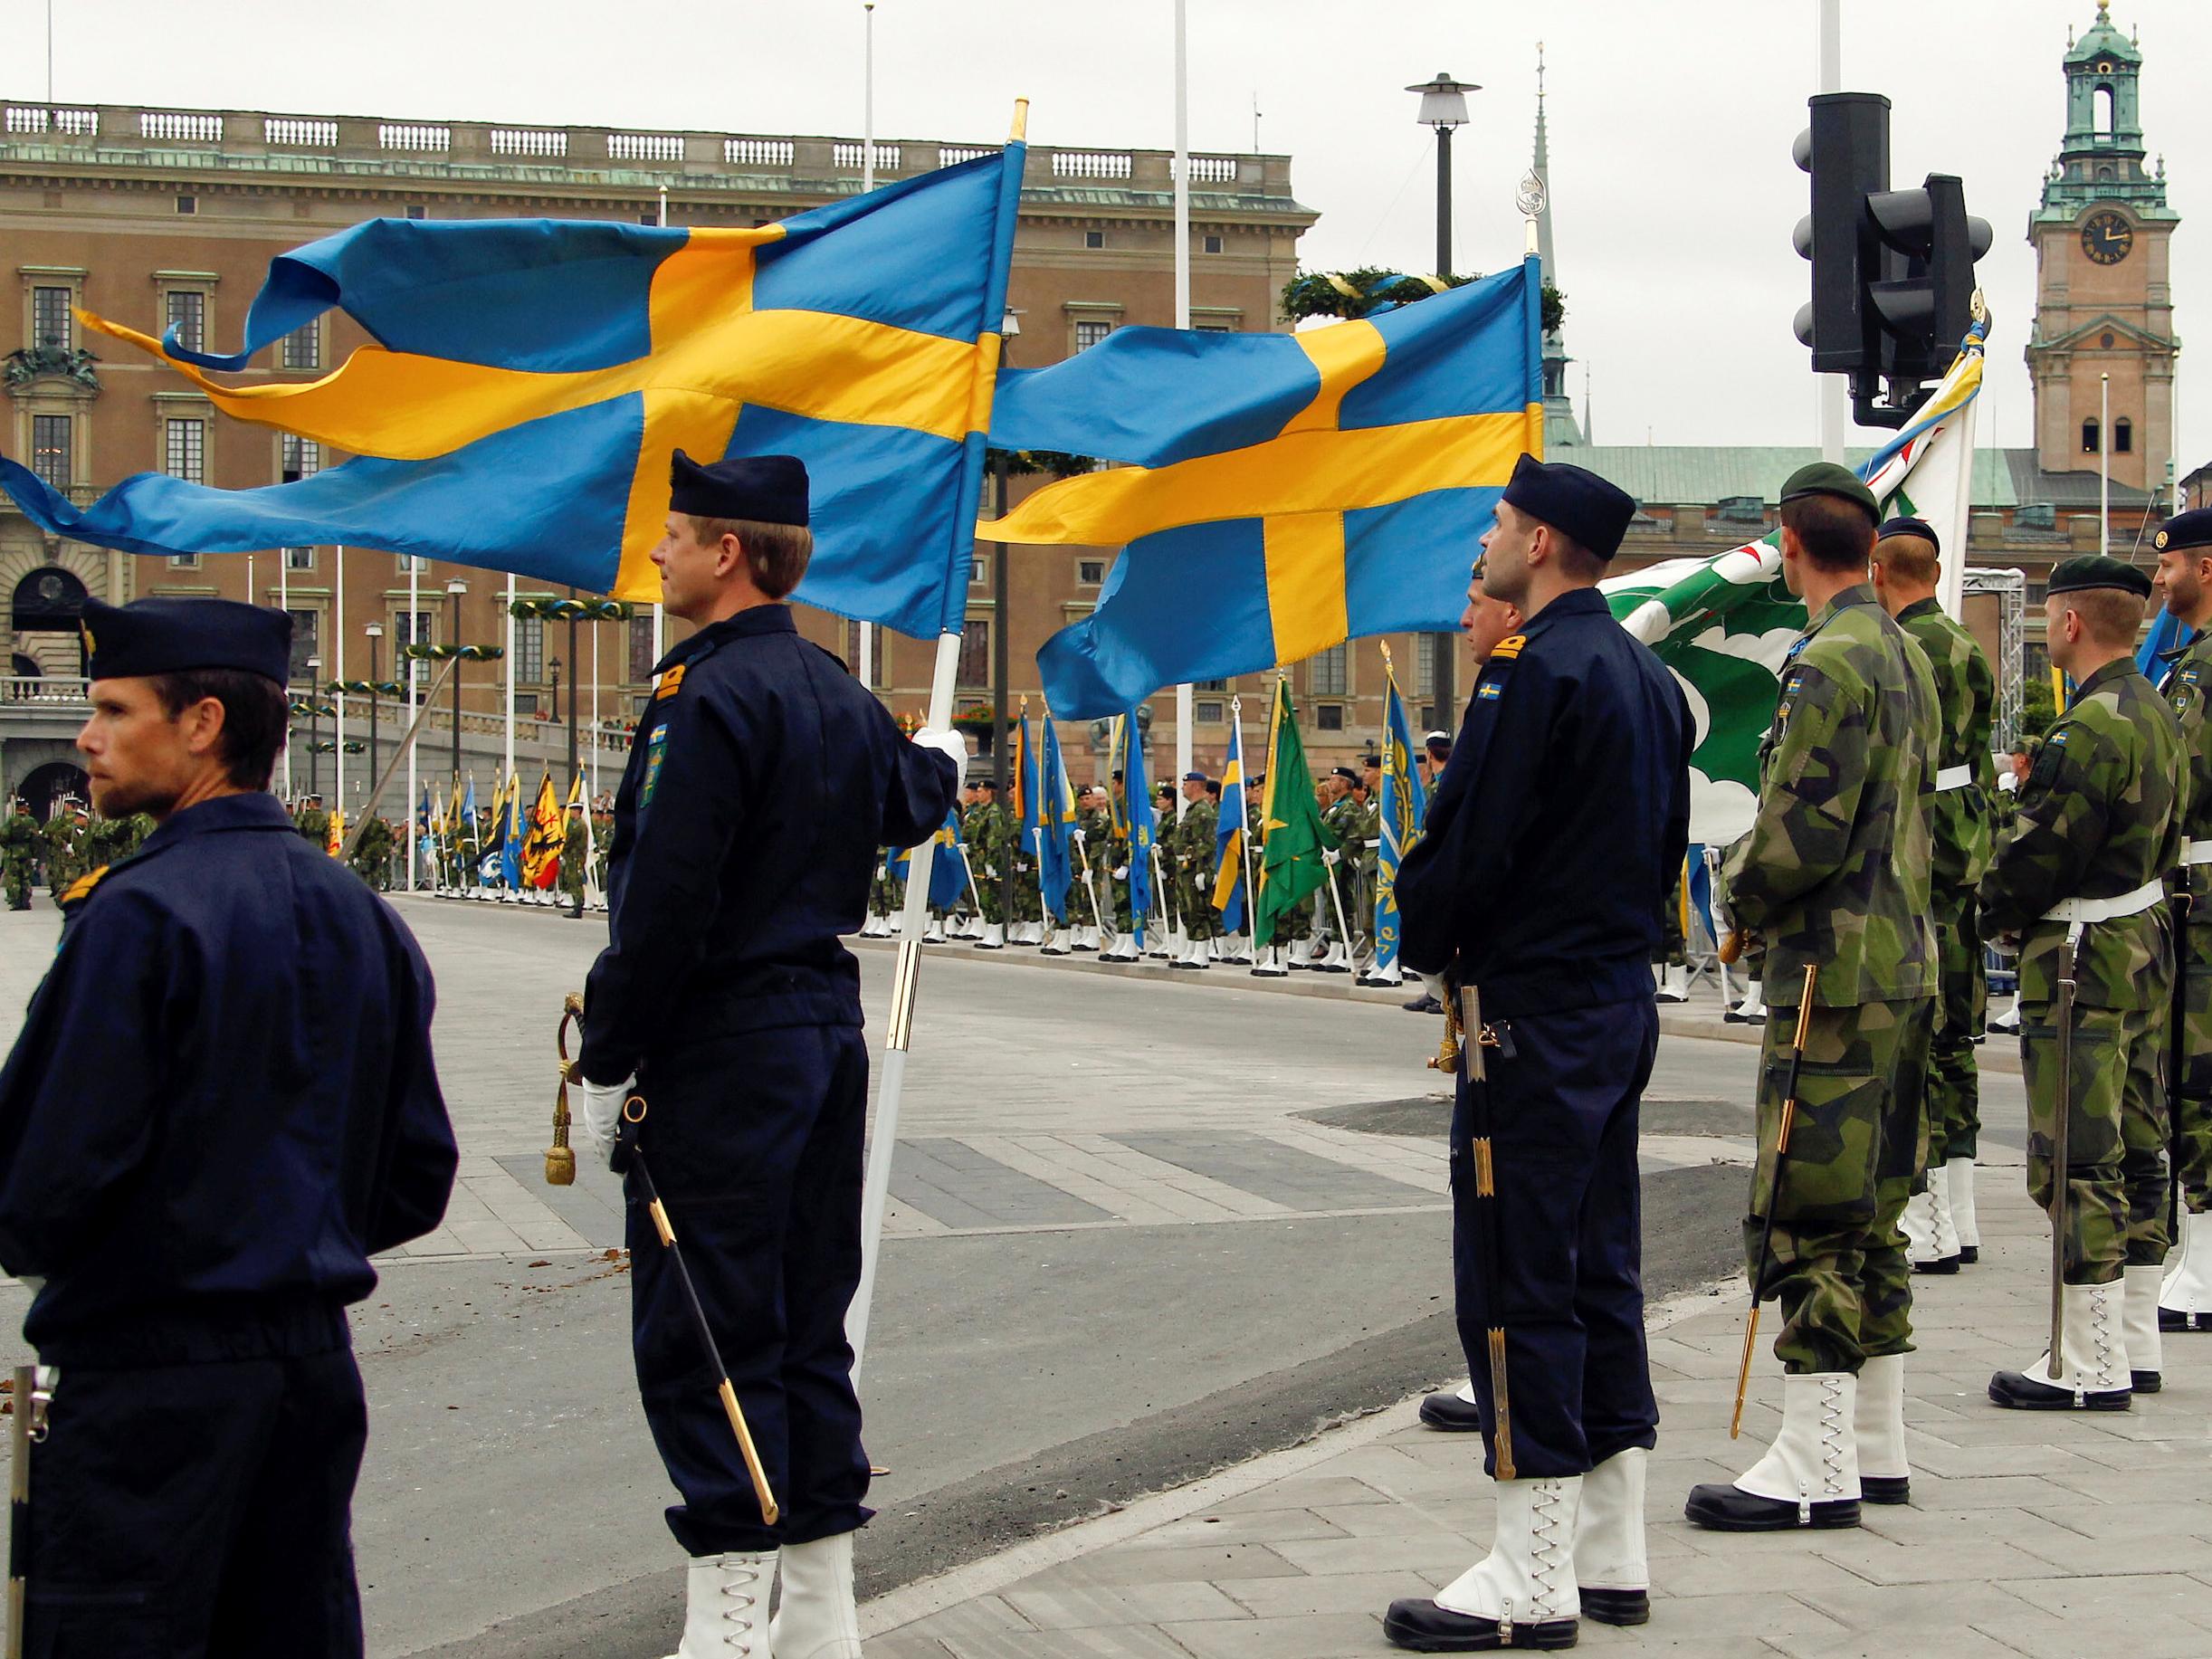 Swedish armed forces soldiers attend a rehearsal in front of the Royal Palace in Stockholm